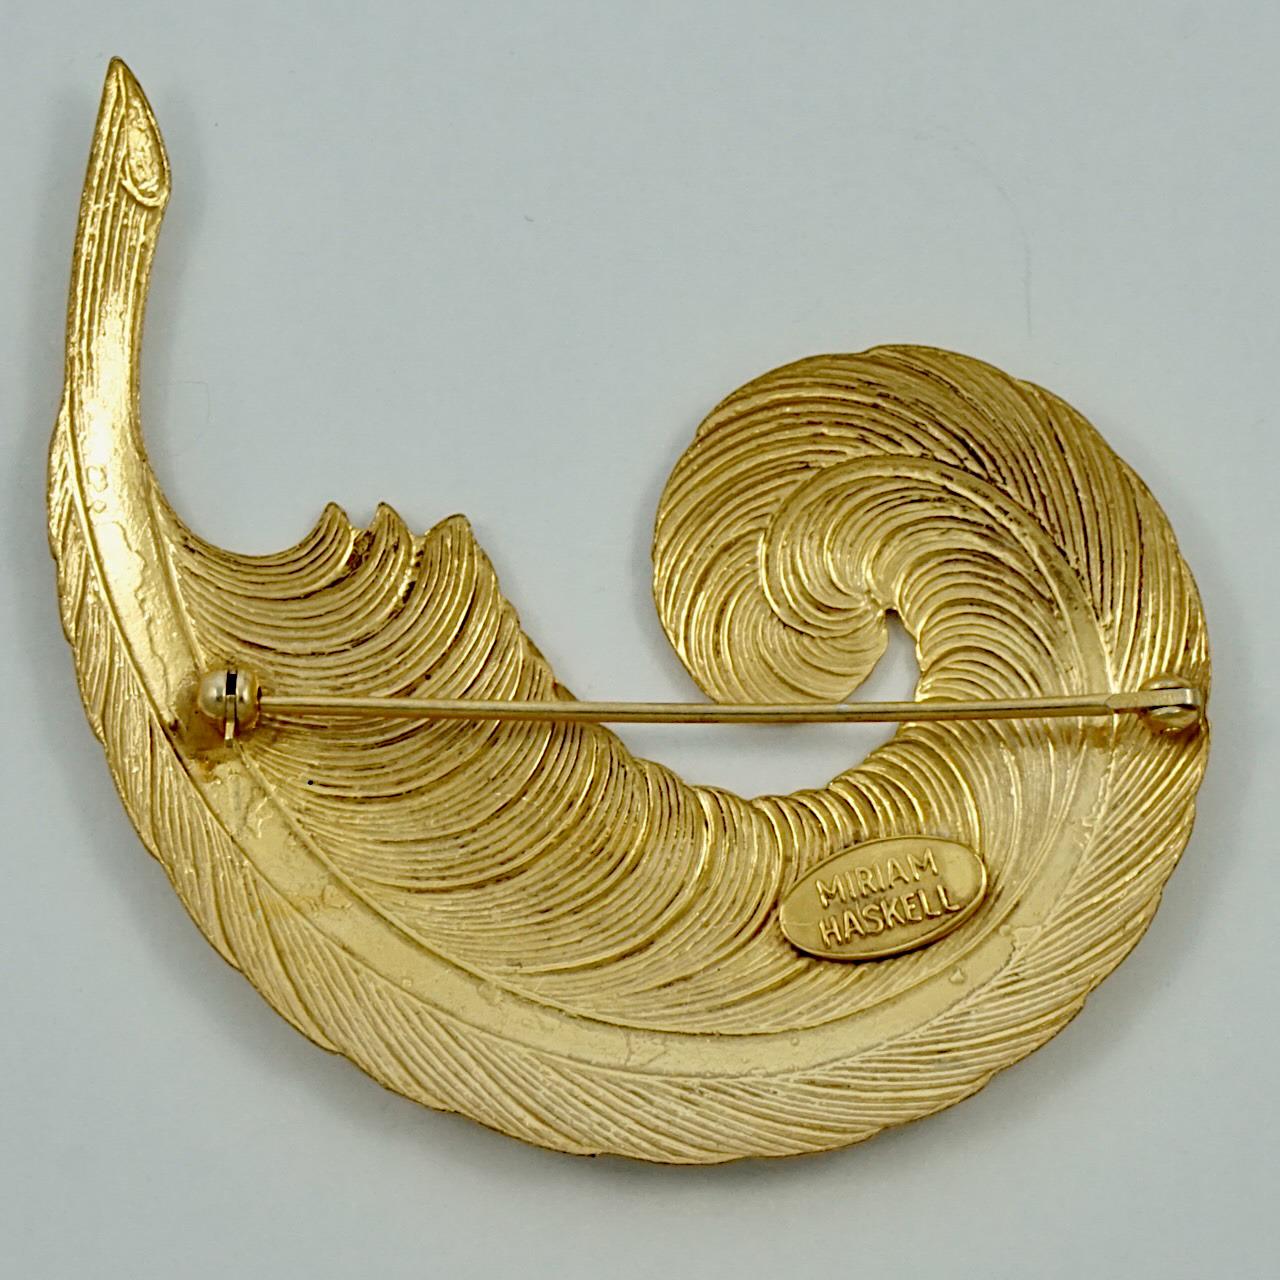 
Miriam Haskell beautiful and stylish Russian gold plated feather brooch. Measuring width 6.2 cm / 2.4 inches. The brooch has scratching.

This is a wonderful feather brooch in a lovely organic shape, with the Haskell Russian gold patina. Circa